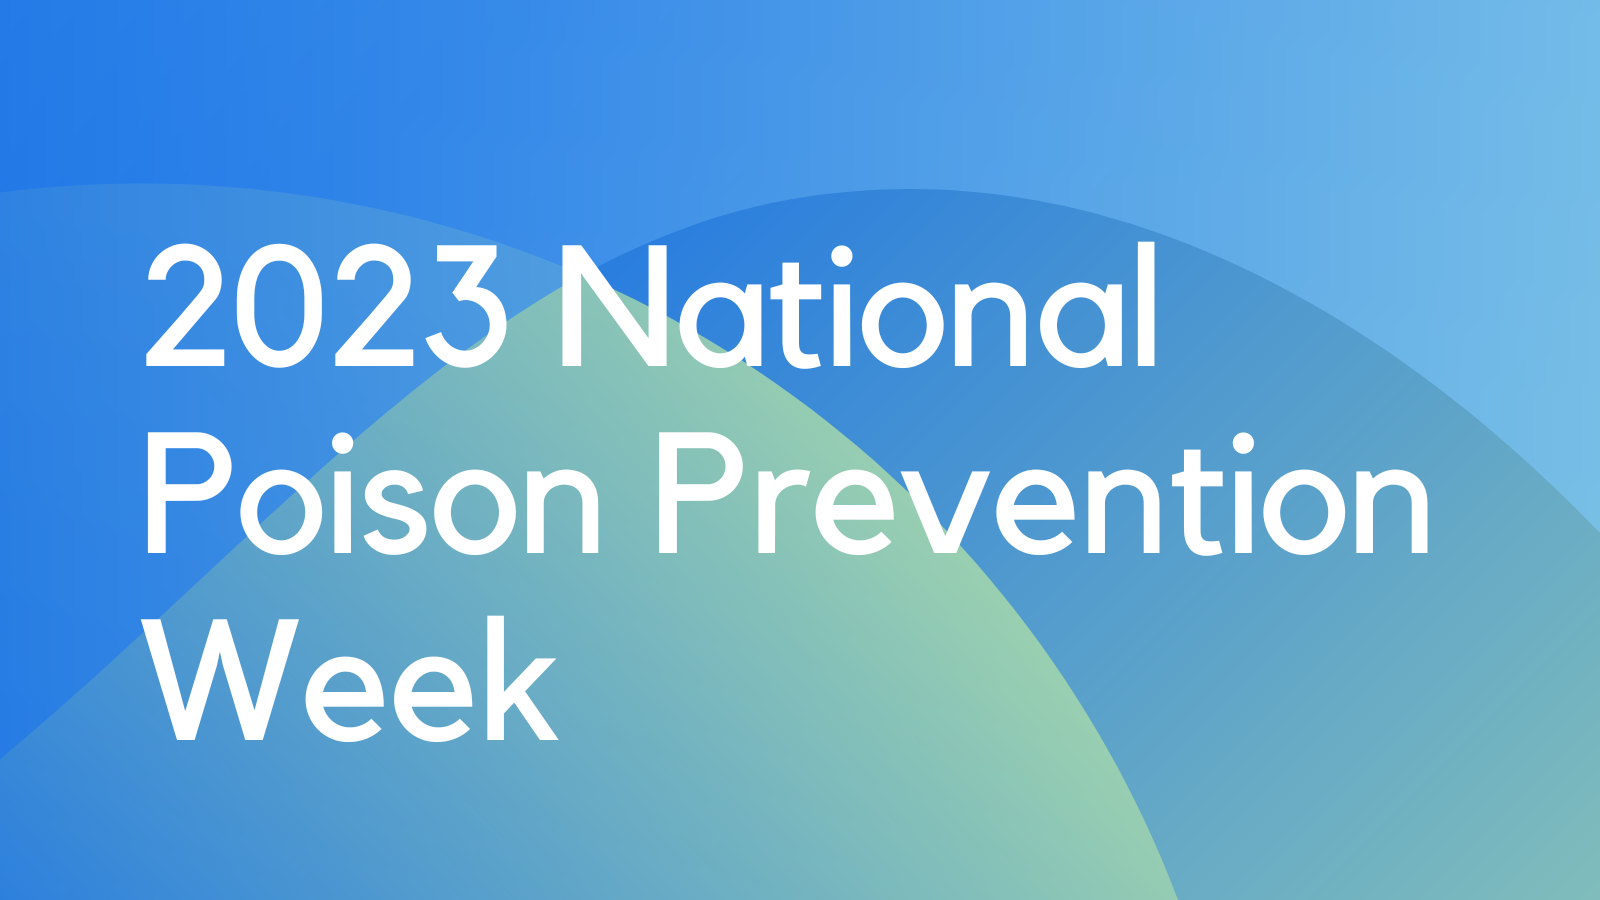 2023 National Poison Prevention Week